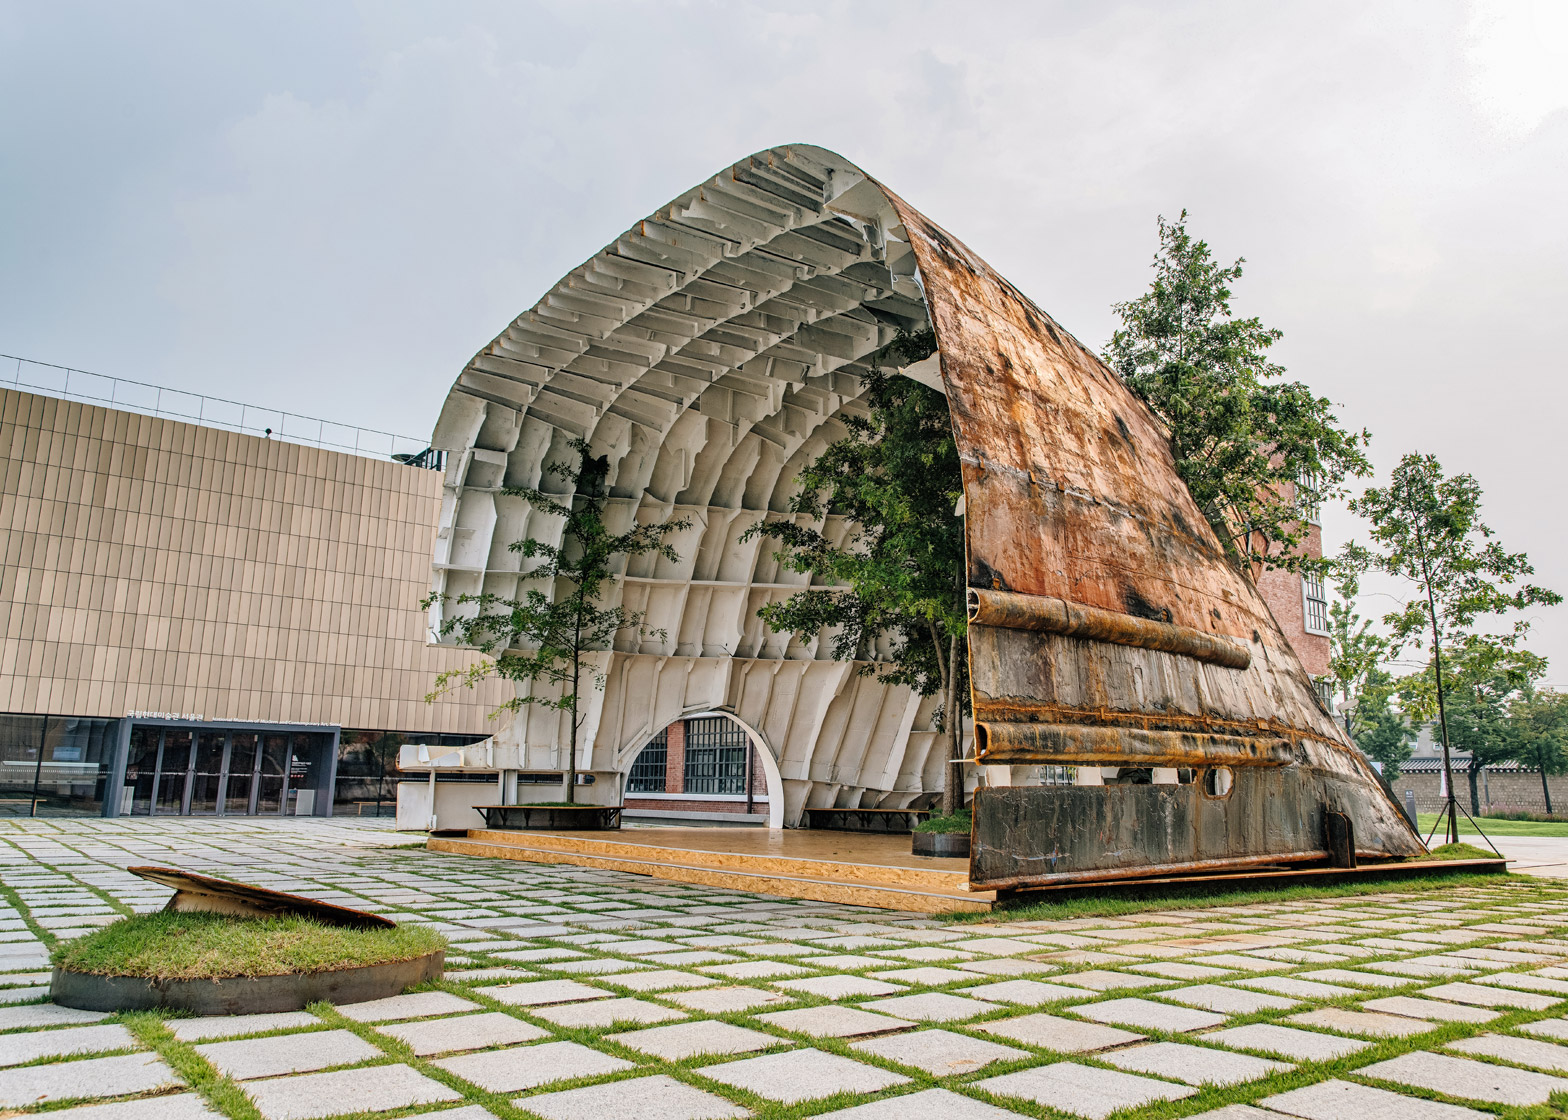 Temp'L by Shinslab Architecture is an installation recycled from a rusty old cargo ship for a museum courtyard in Seoul